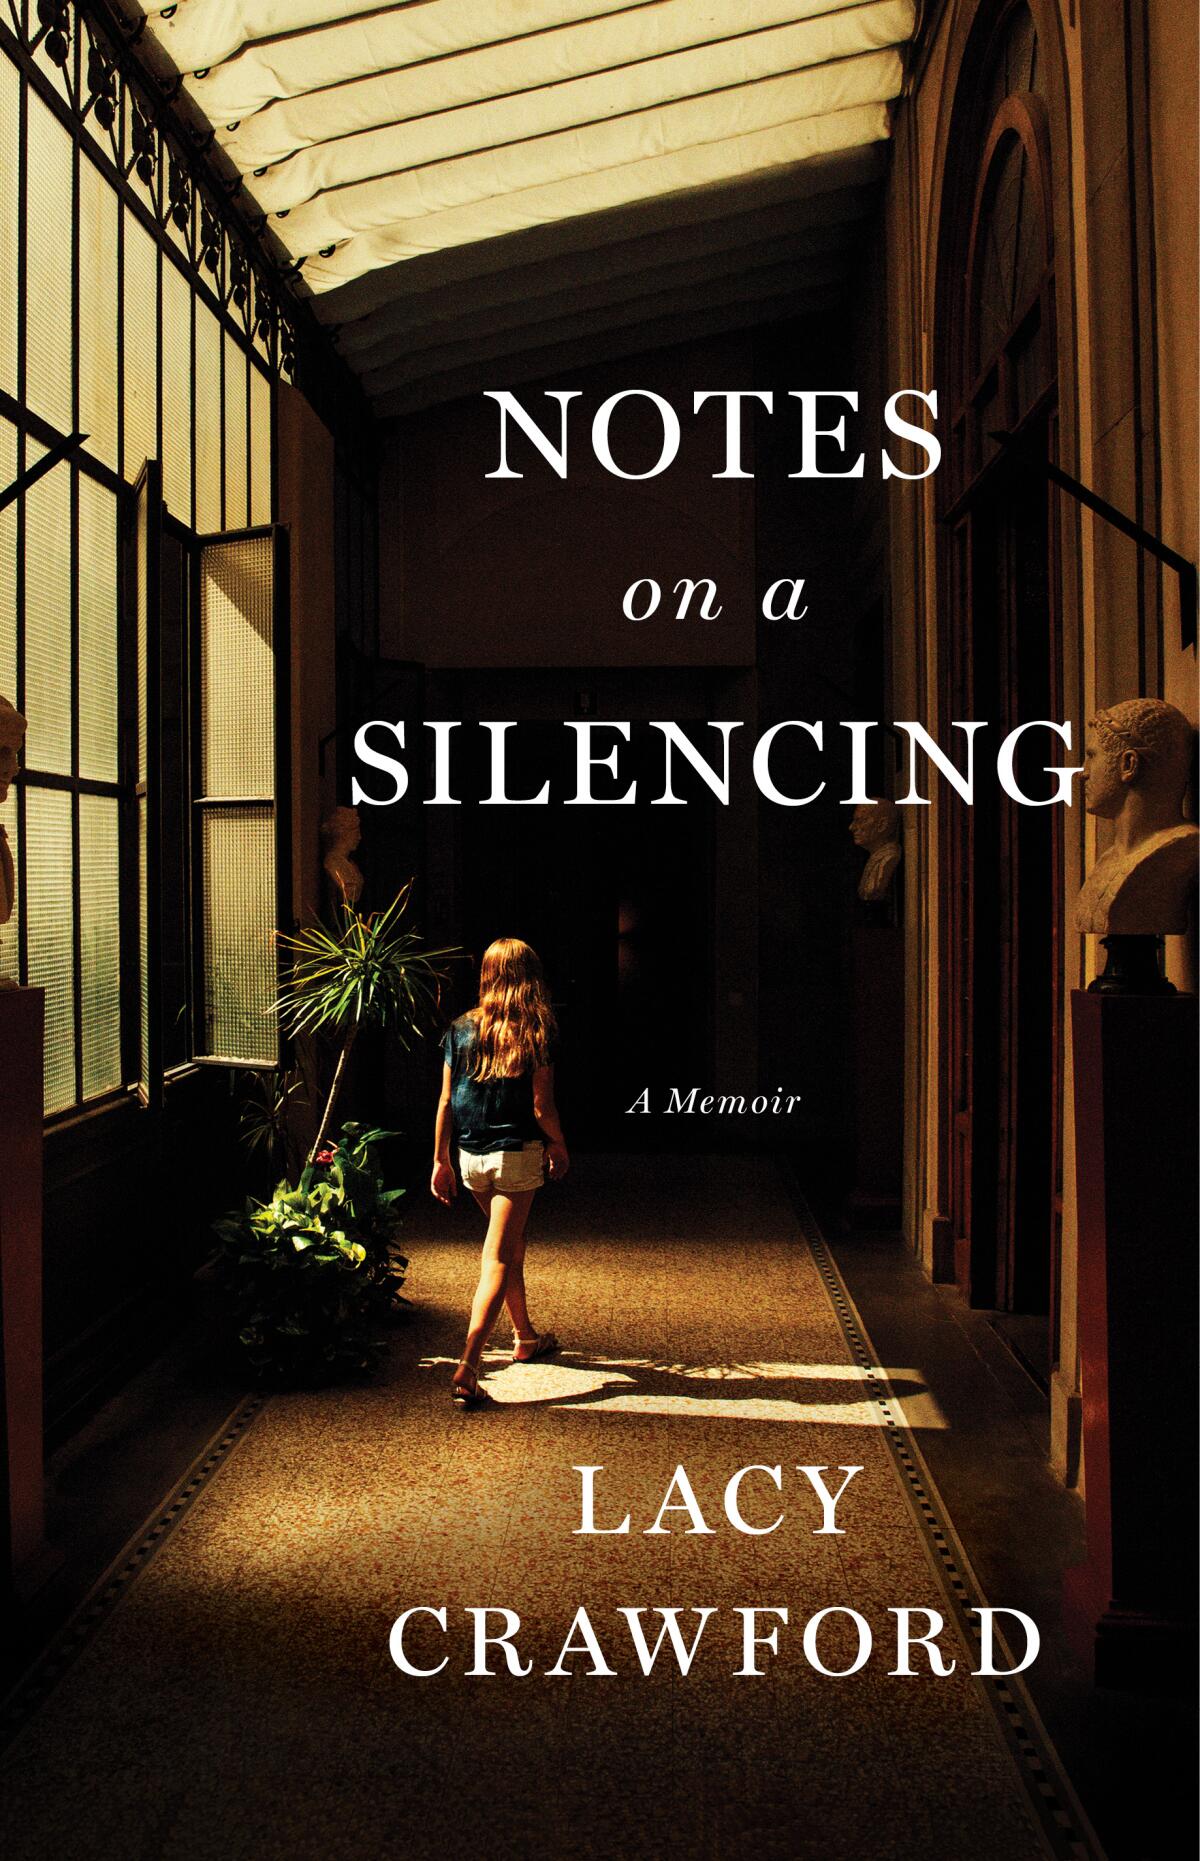 Lacy Crawford's new book, "Notes on a Silencing."